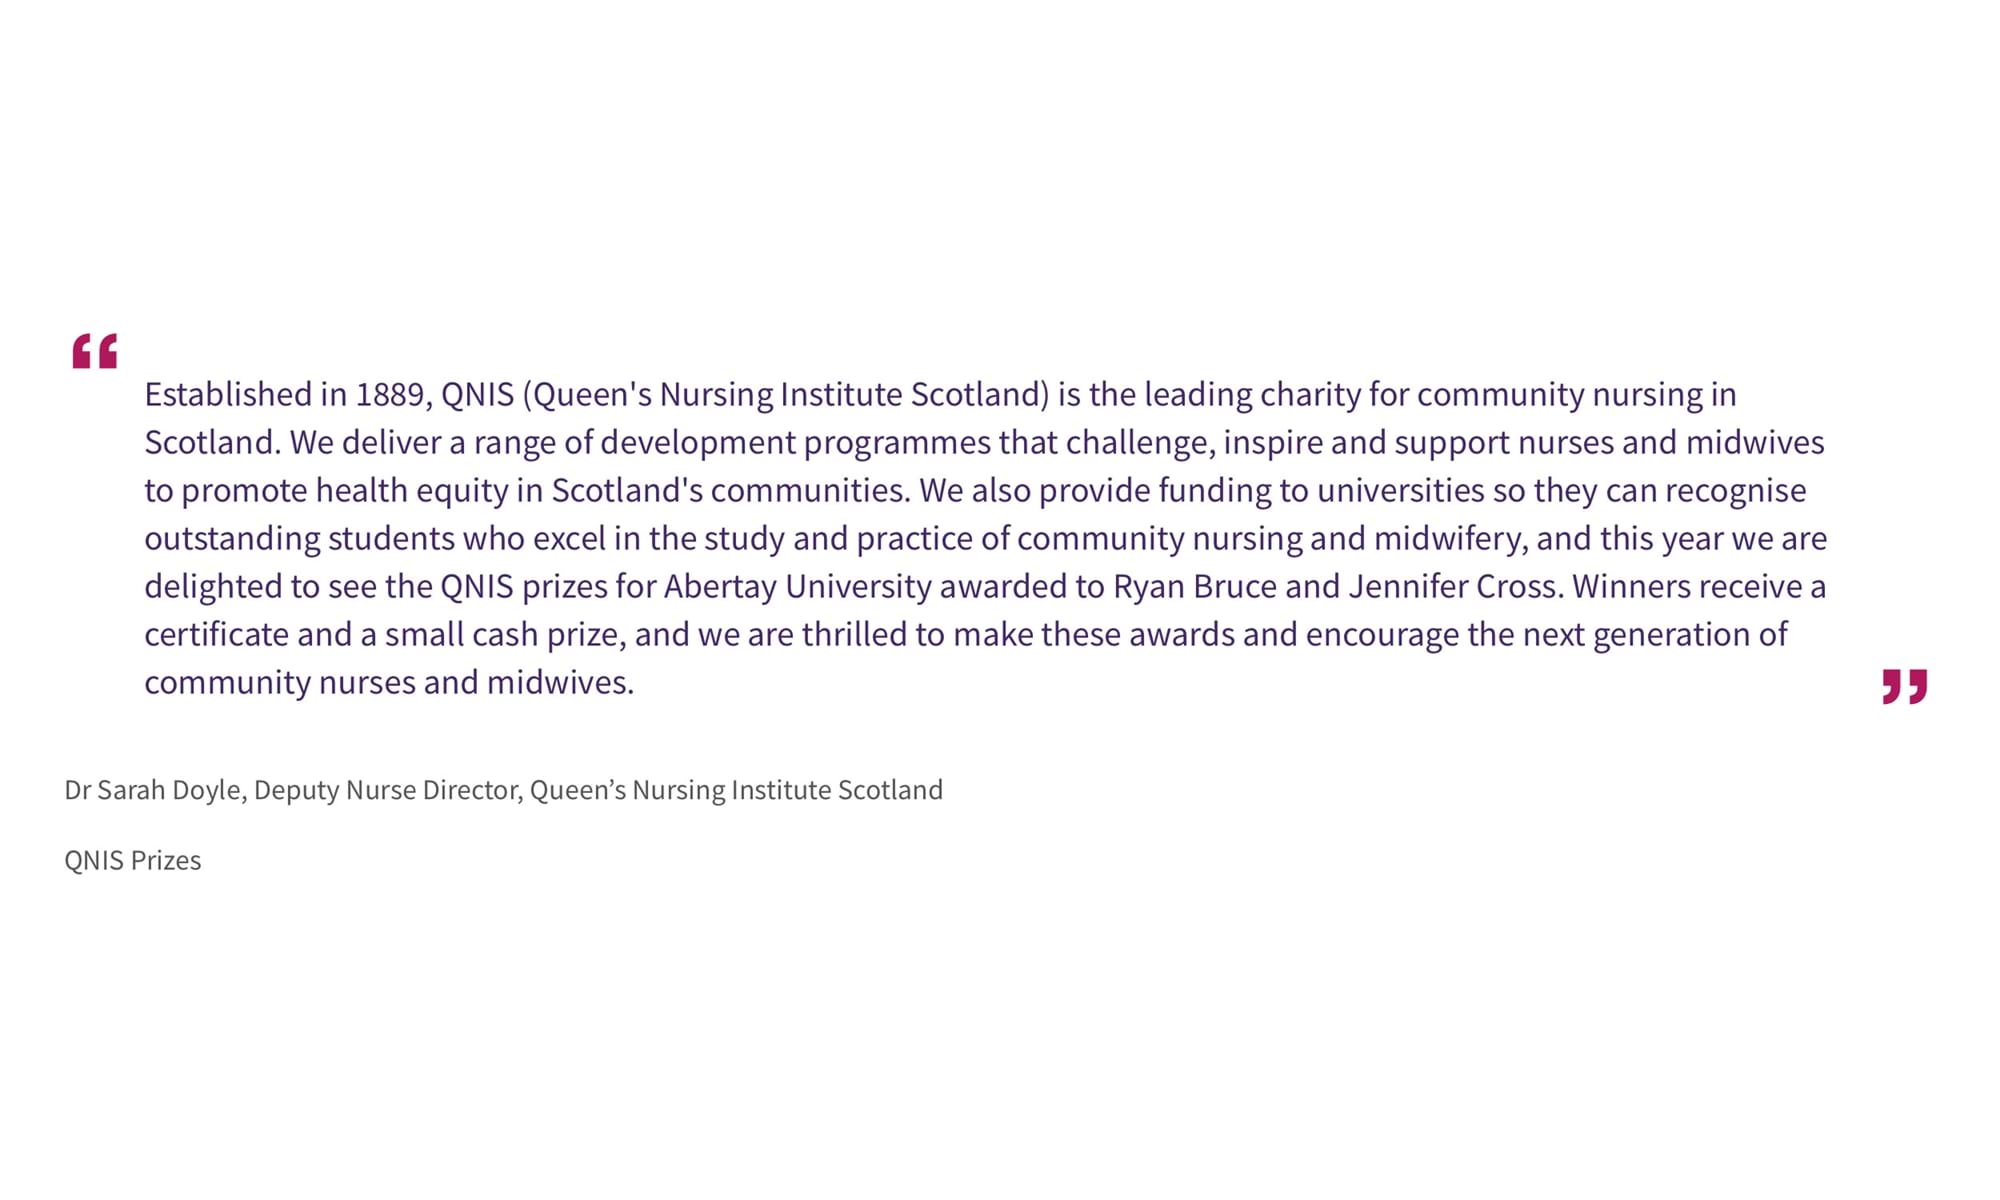 Dr Sarah Doyle, Deputy Nurse Director, Queen’s Nursing Institute Scotland
QNIS Prizes
“Established in 1889, QNIS (Queen's Nursing Institute Scotland) is the leading charity for community nursing in Scotland. We deliver a range of development programmes that challenge, inspire and support nurses and midwives to promote health equity in Scotland's communities. We also provide funding to universities so they can recognise outstanding students who excel in the study and practice of community nursing and midwifery, and this year we are delighted to see the QNIS prizes for Abertay University awarded to Ryan Bruce and Jennifer Cross. Winners receive a certificate and a small cash prize, and we are thrilled to make these awards and encourage the next generation of community nurses and midwives.”
